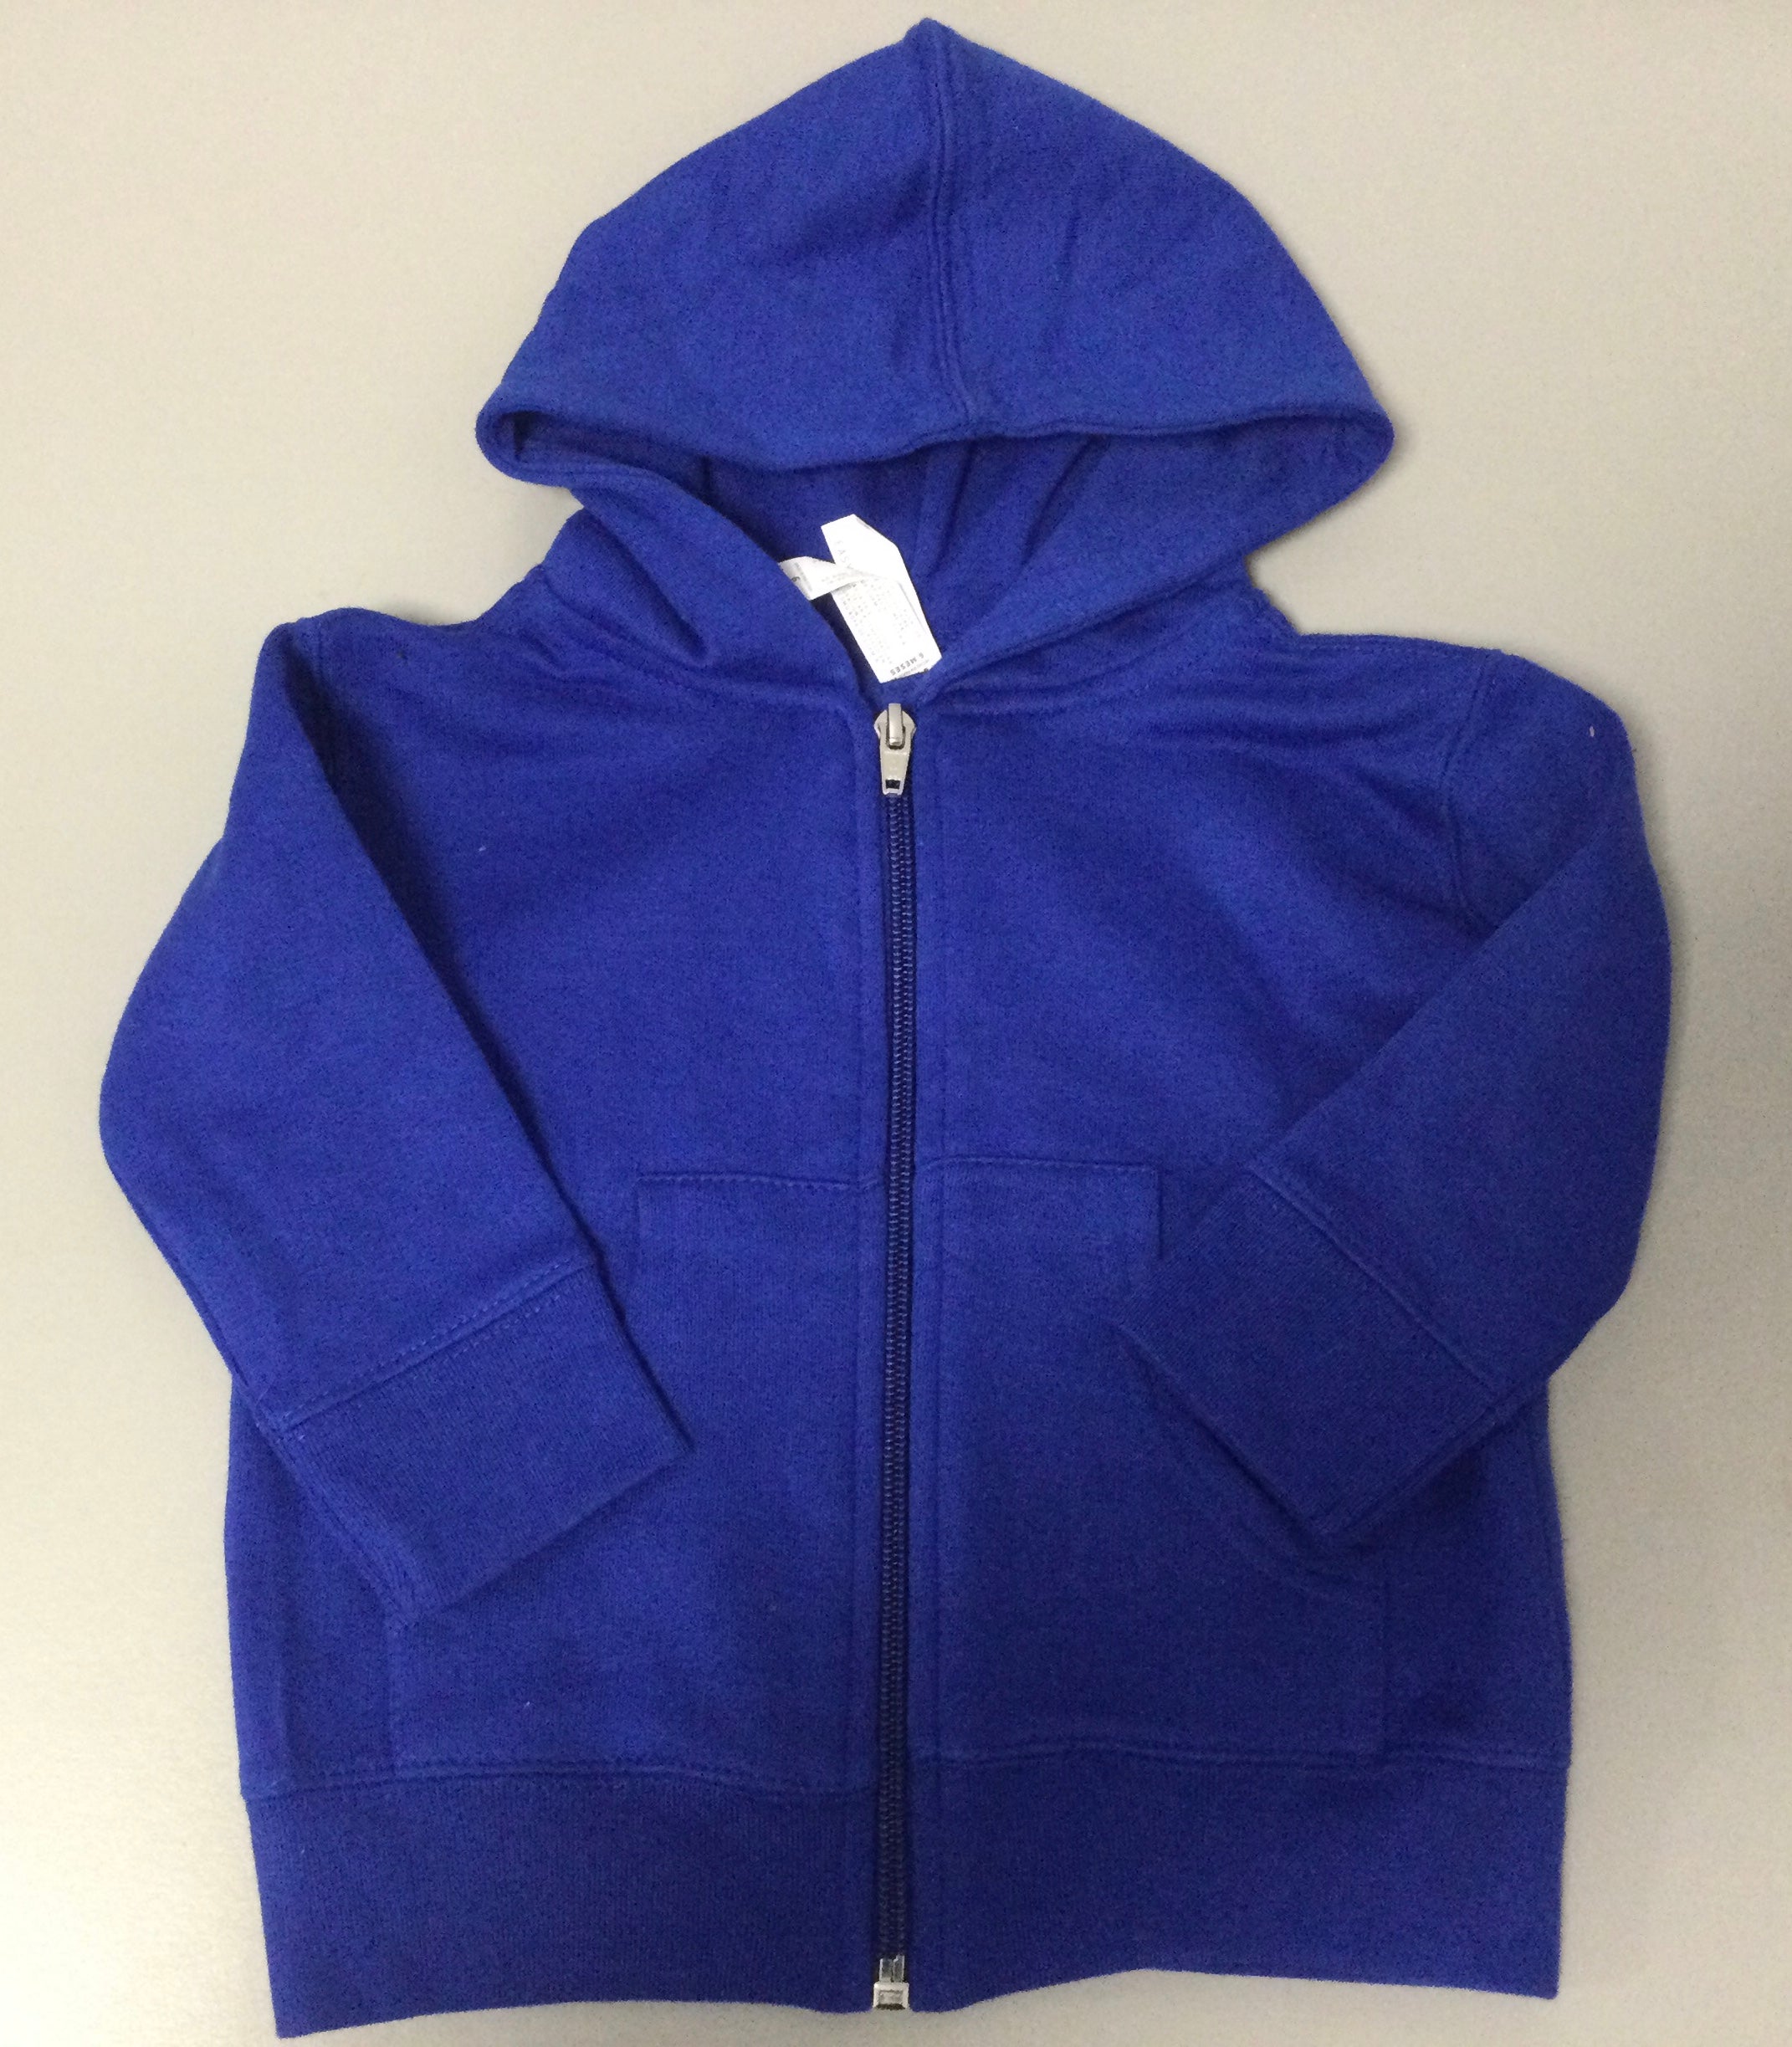 Baby Zip Up Hooded Sweatshirt Blue with Bling Logo